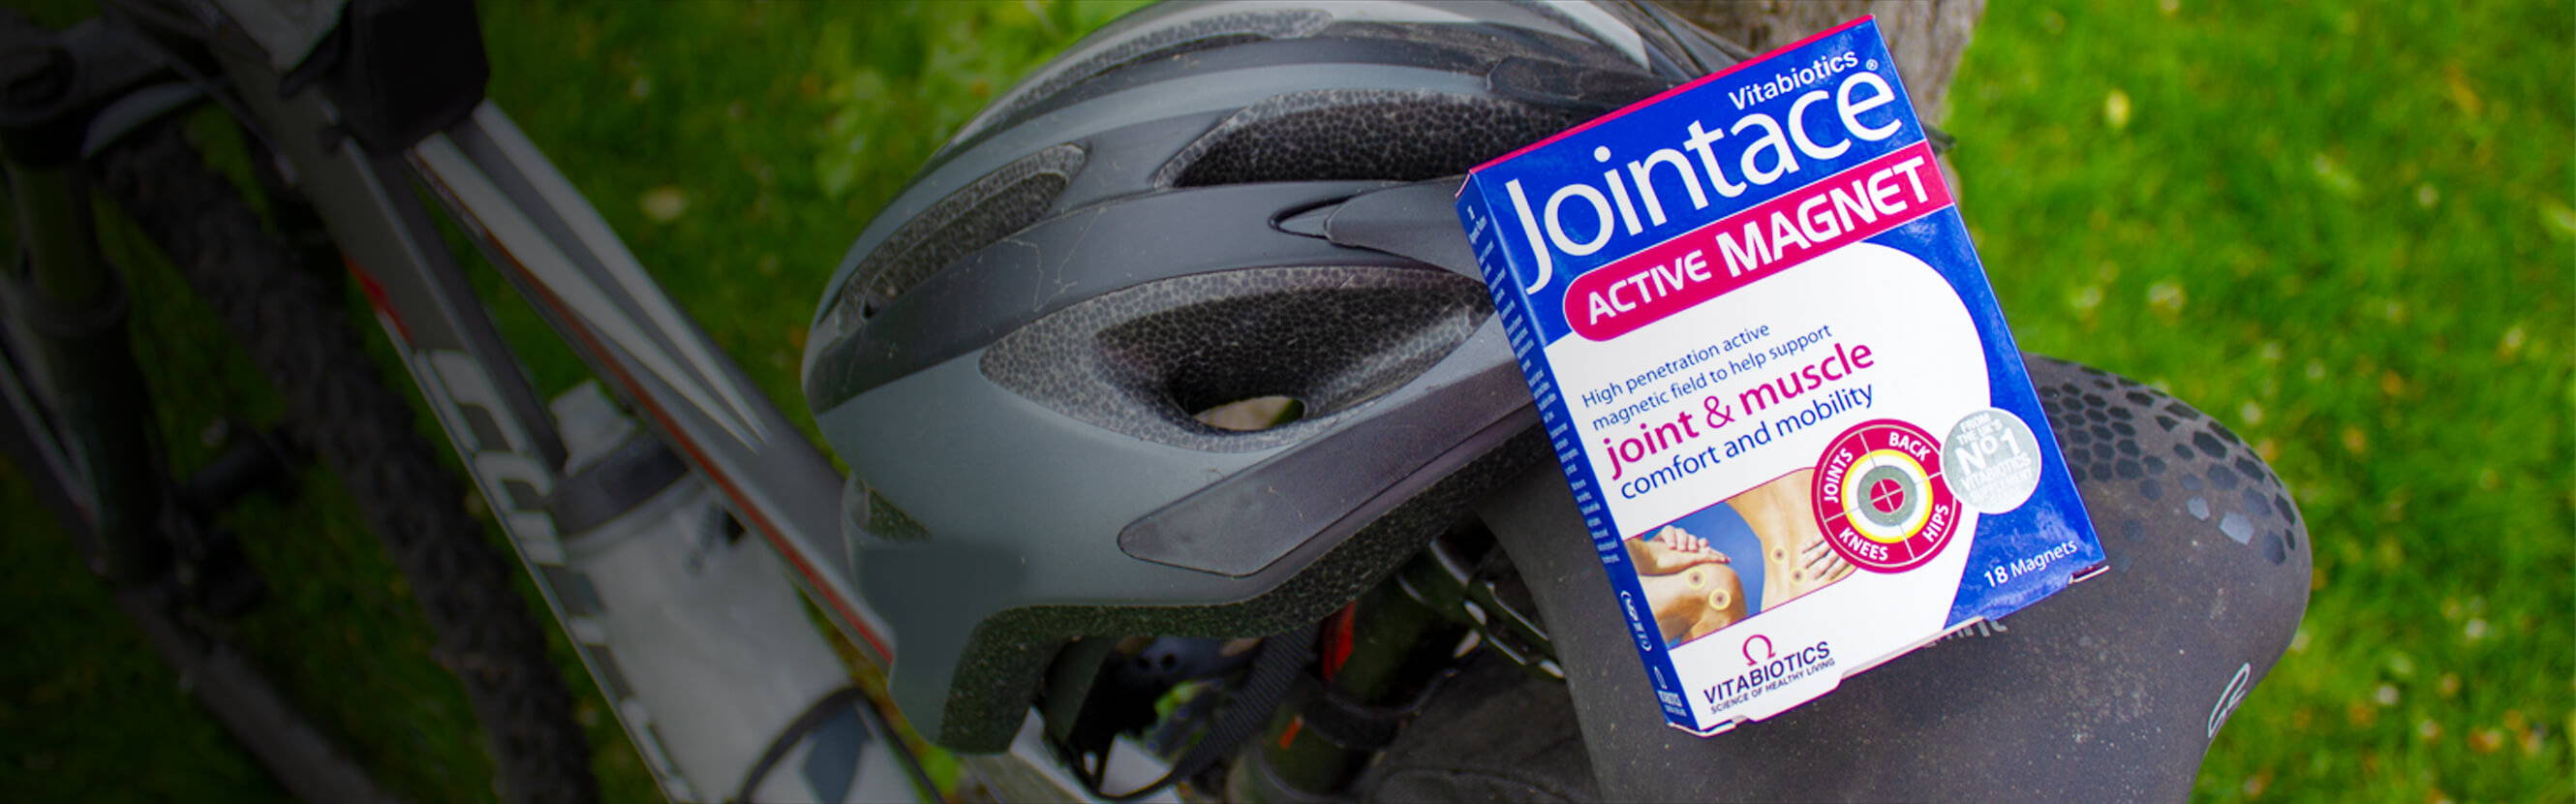  There’s nothing magic about magnets, but they’re a complementary approach to a healthy lifestyle and supplements like Jointace Glucosamine and Chondroitin. Free from side effects, Jointace Active Magnet targets joints and muscles with a strong active field – so you can lead a strong, active life. 